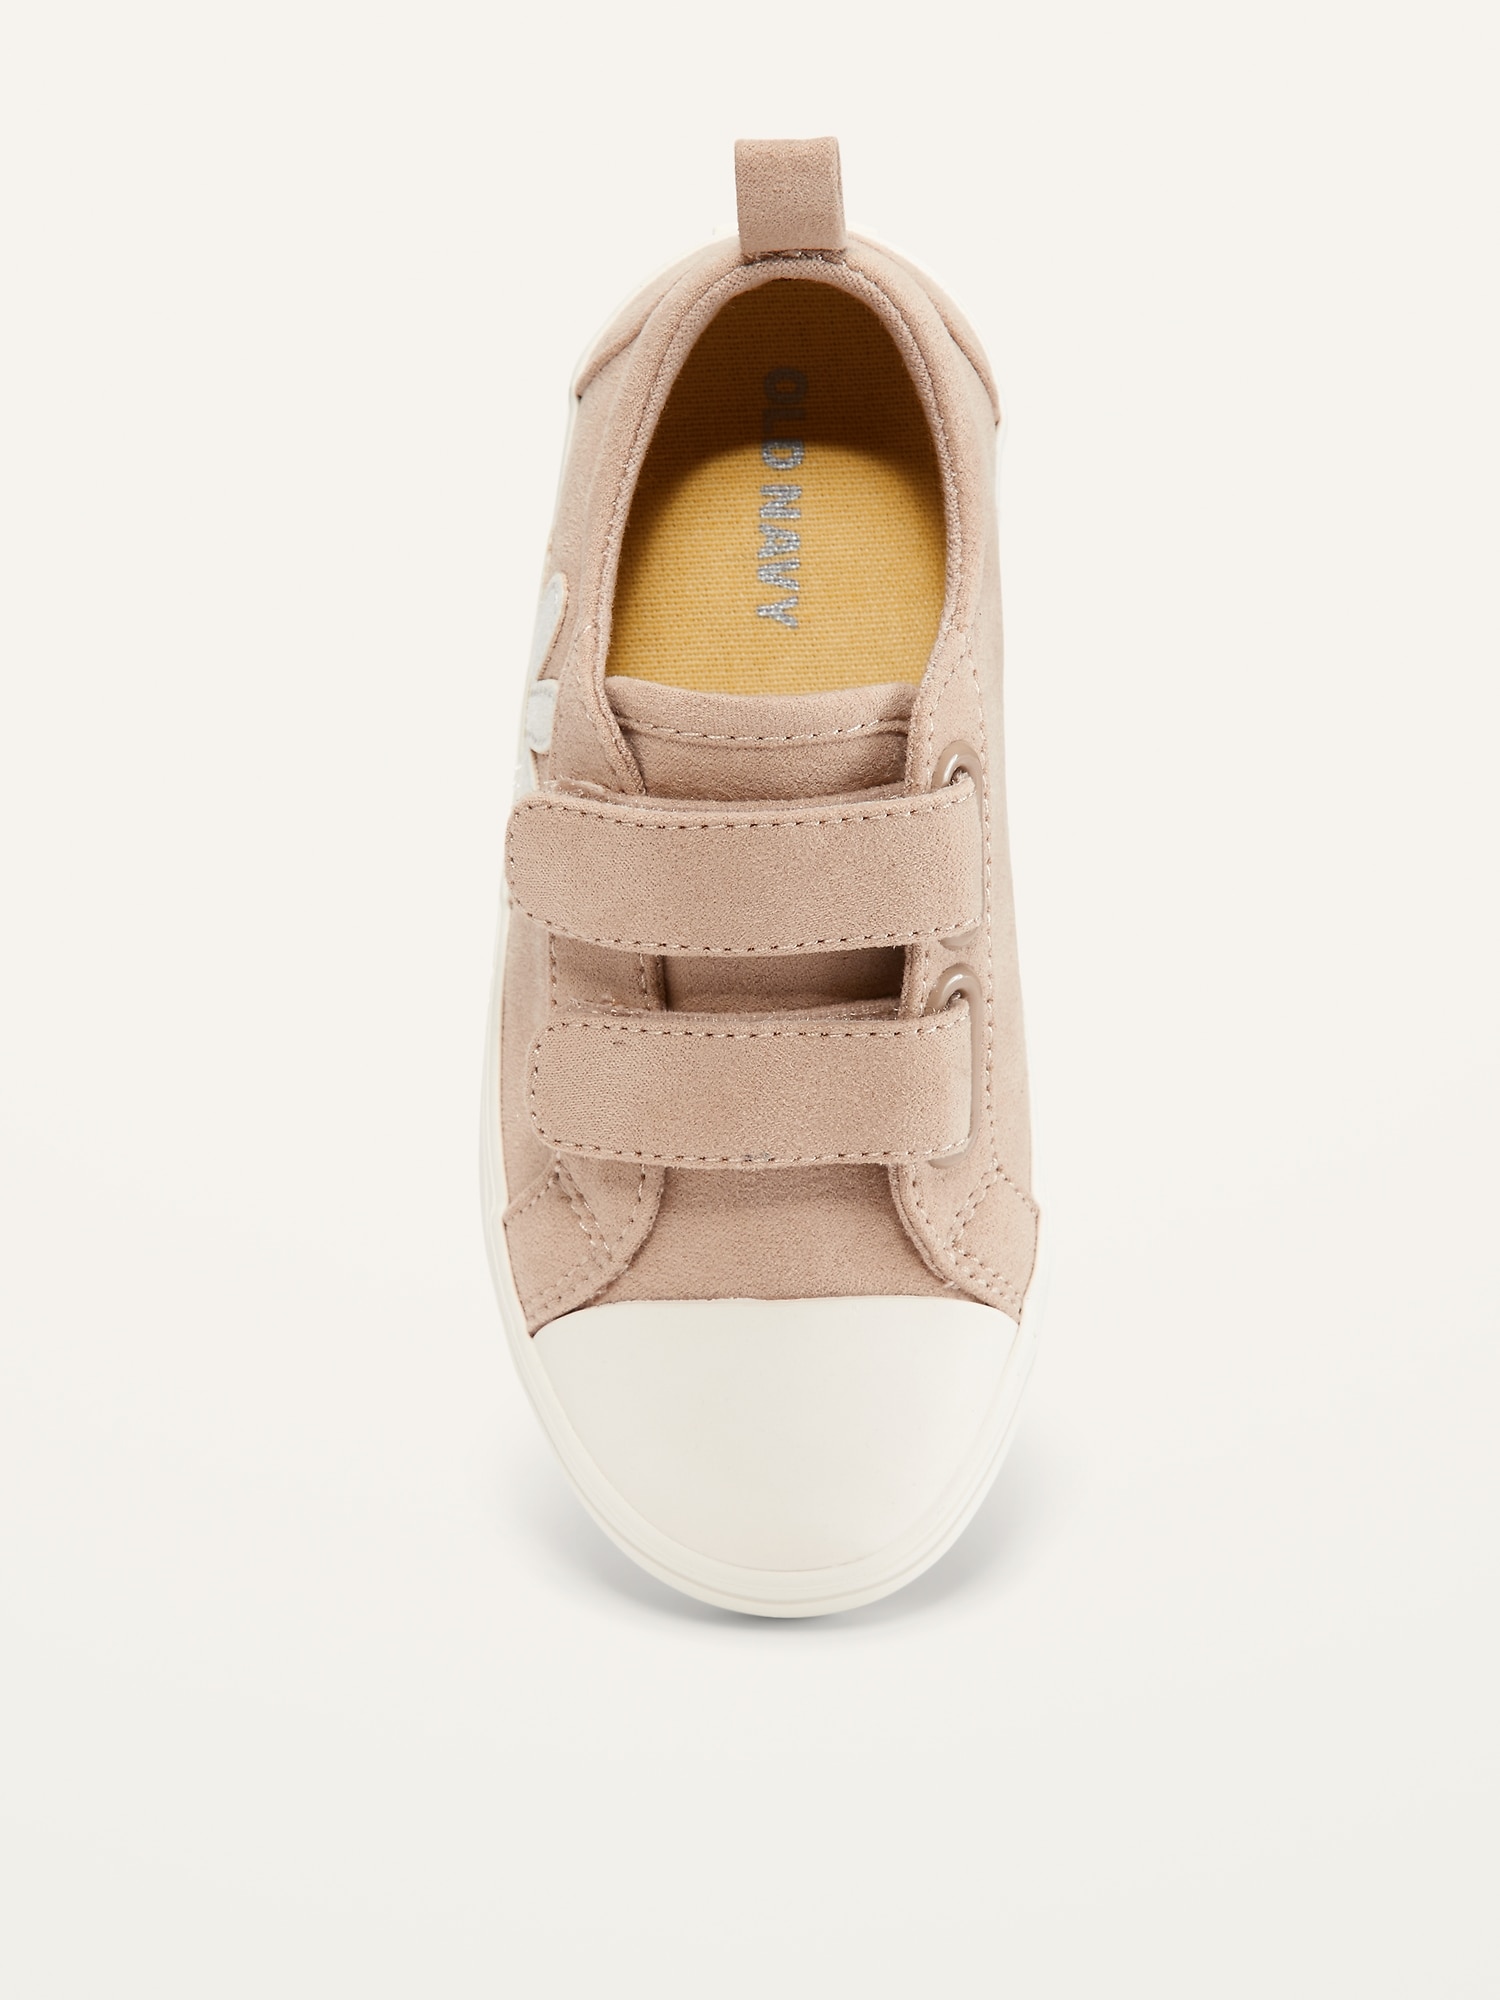 Secure-Close Flower-Applique Sneakers for Toddler Girls | Old Navy